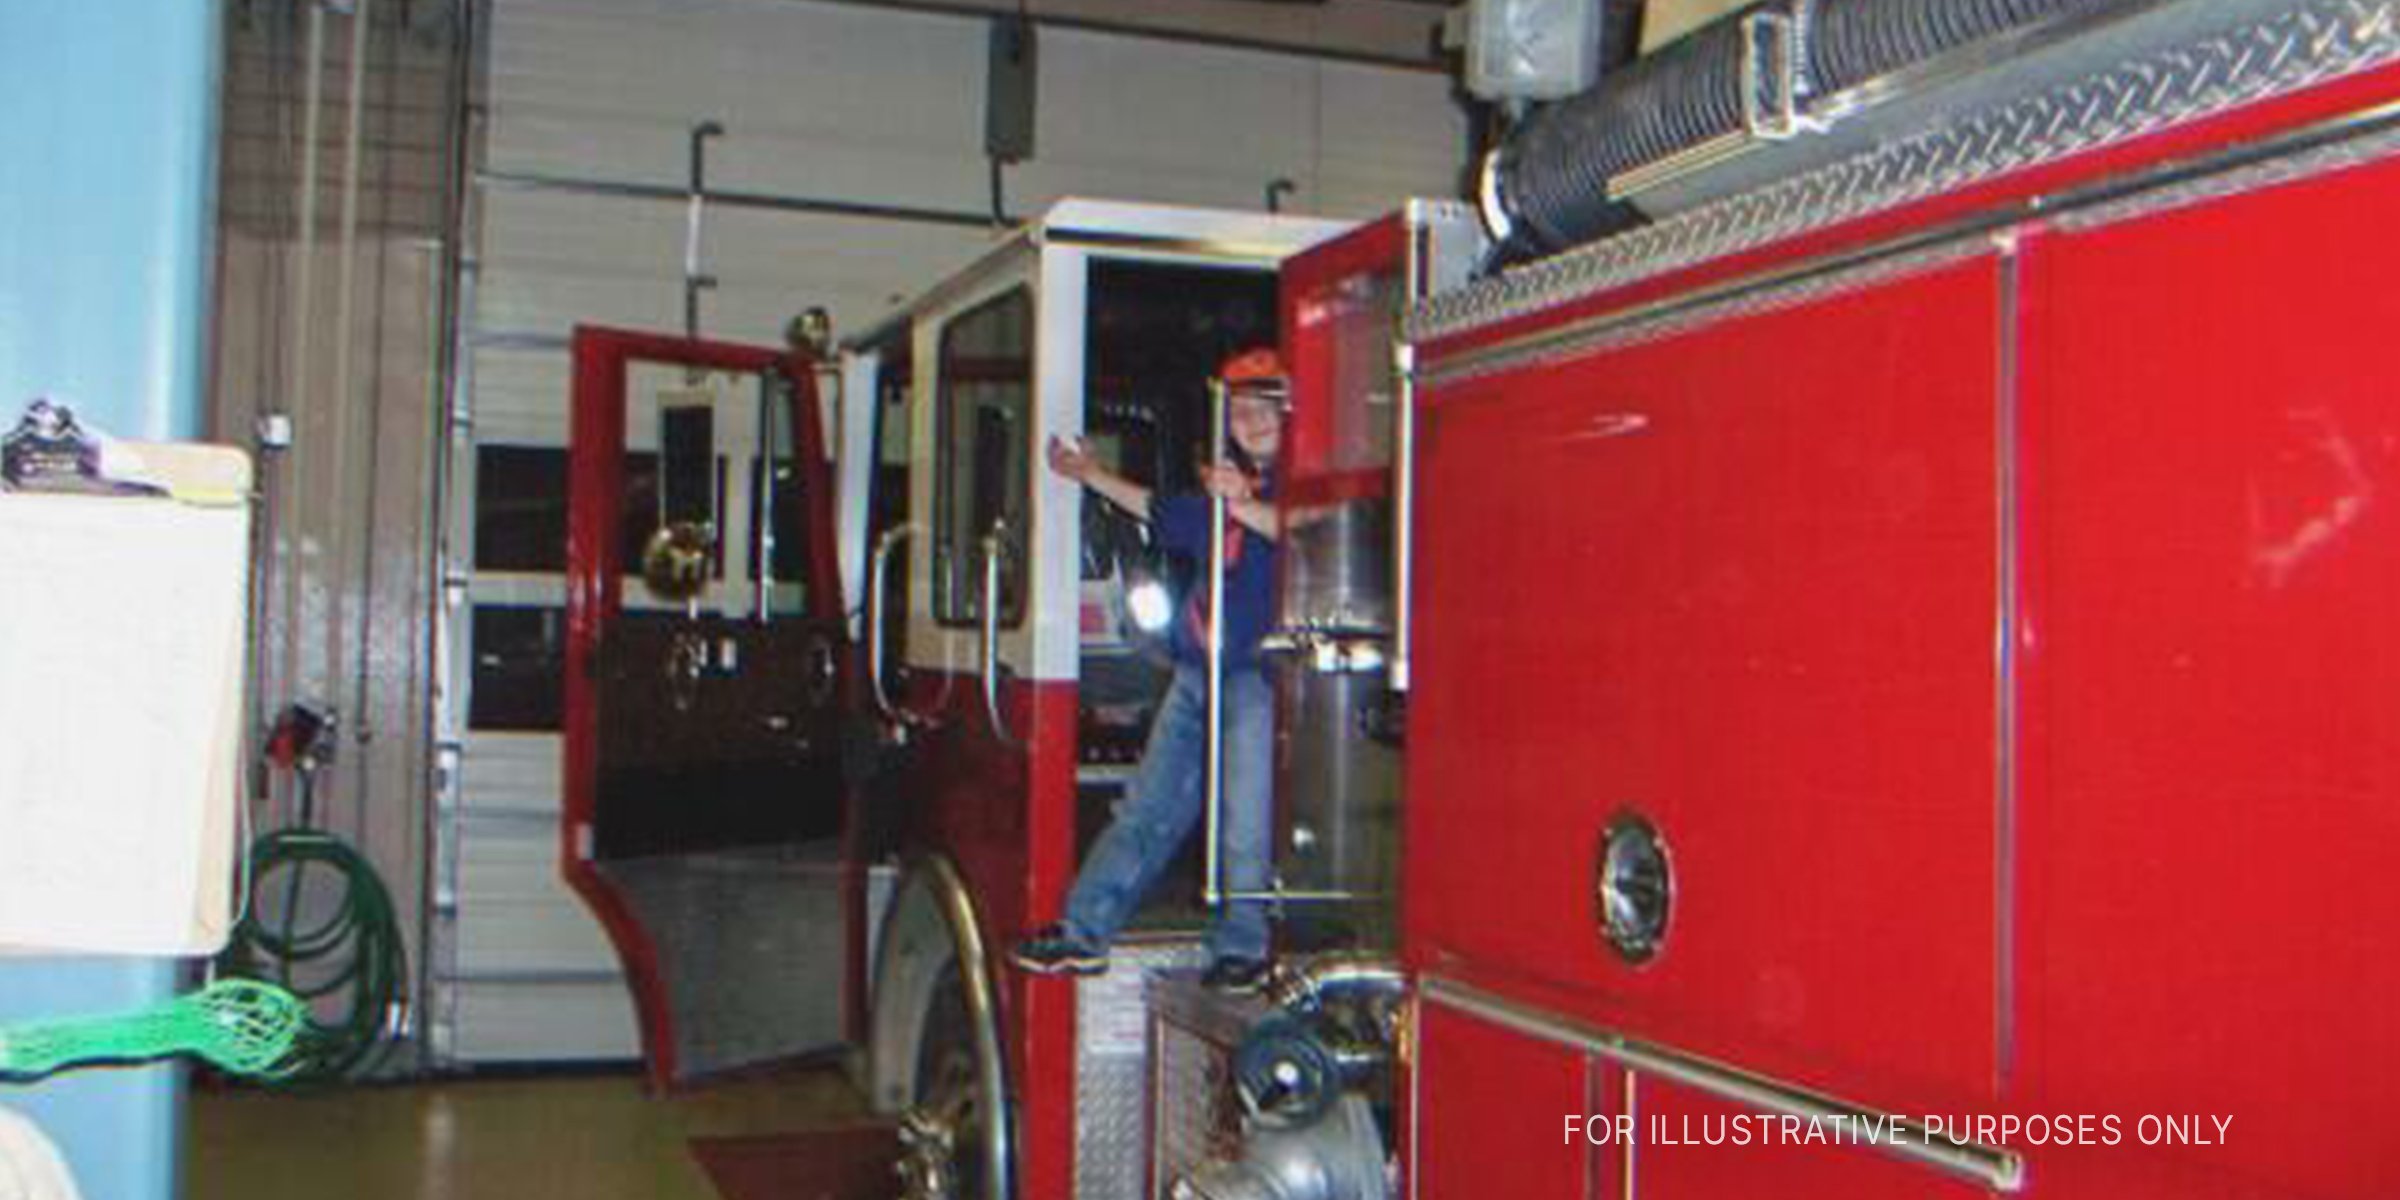 Boy in a fire station. | Source: Flickr / lori05871 (CC BY 2.0)